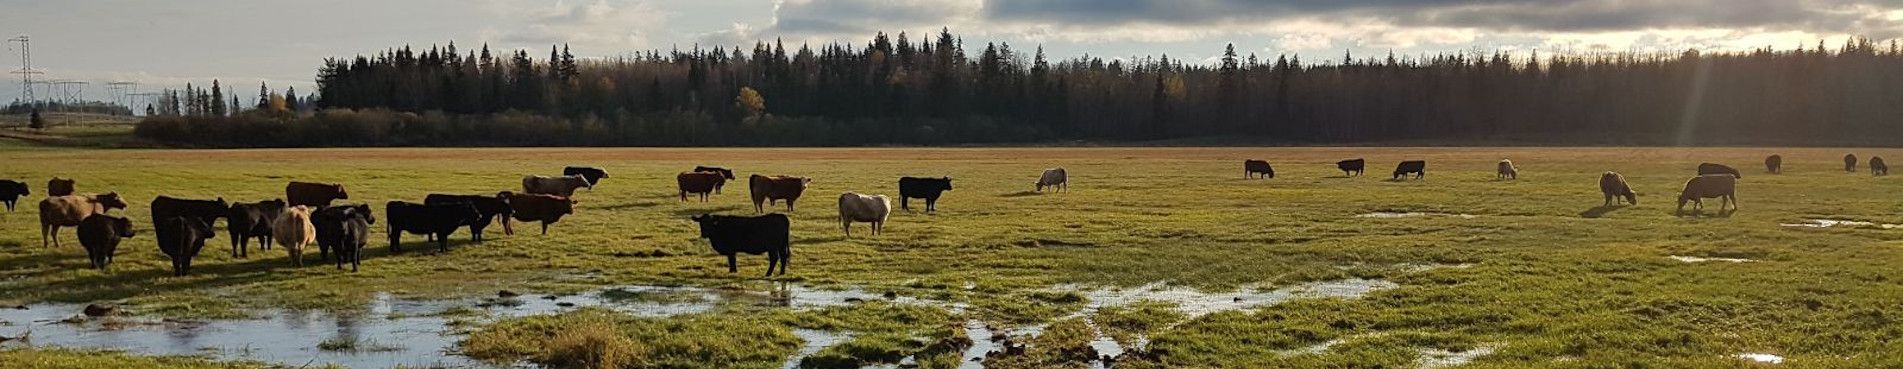 Cattle Spread out over a large, wet field